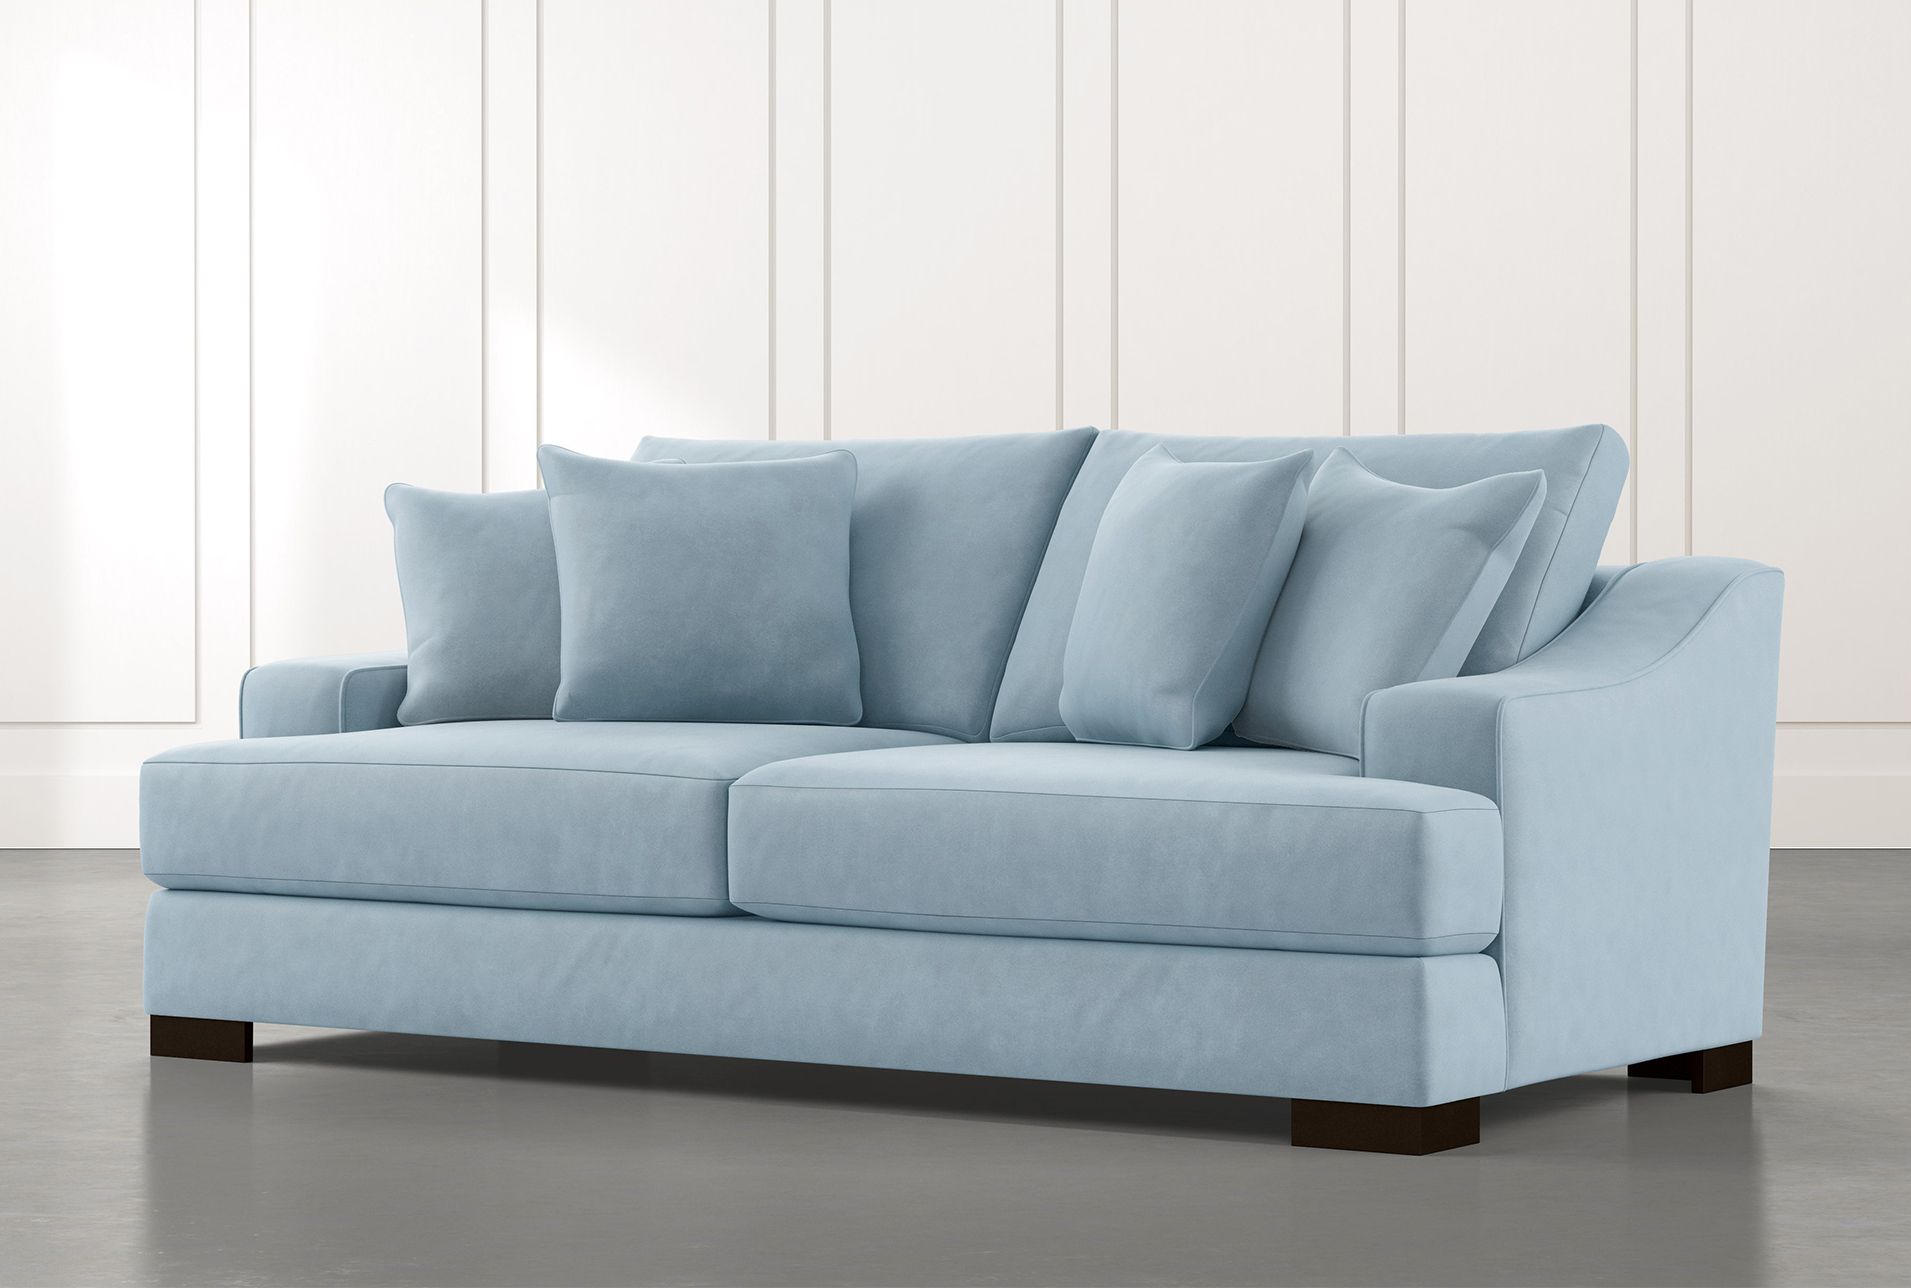 Lodge 96" Light Blue Sofa | Living Spaces With Sofas In Blue (Gallery 18 of 20)